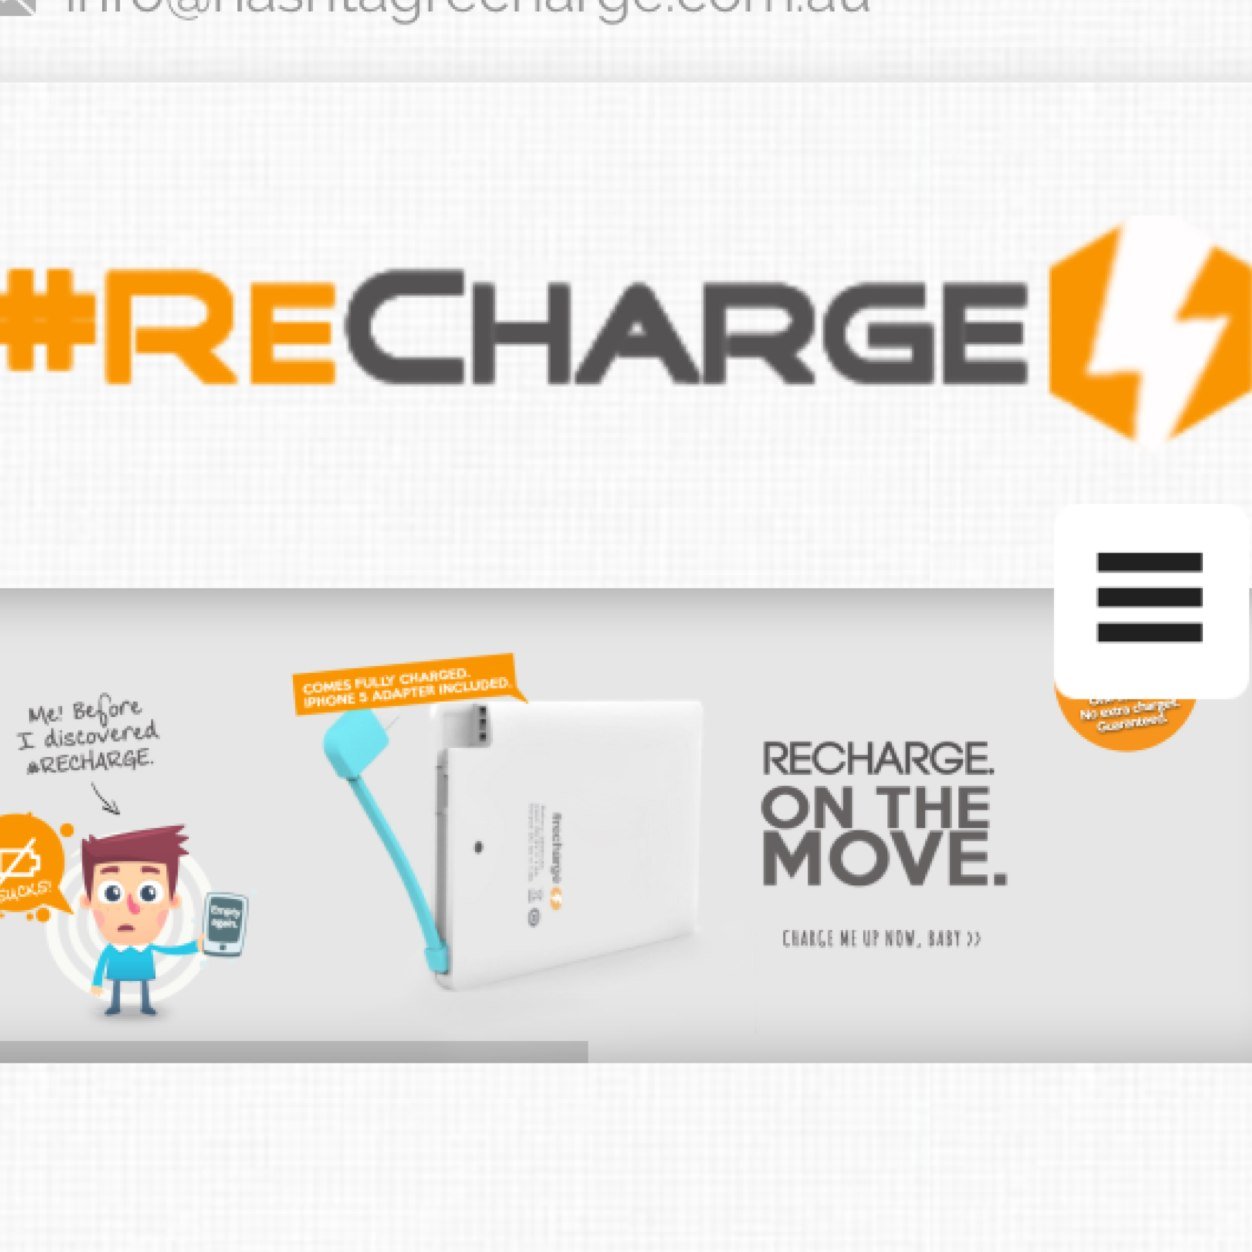 Stay powered with our 'On the move chargers' - At all major events and venues across Australia and the UK.